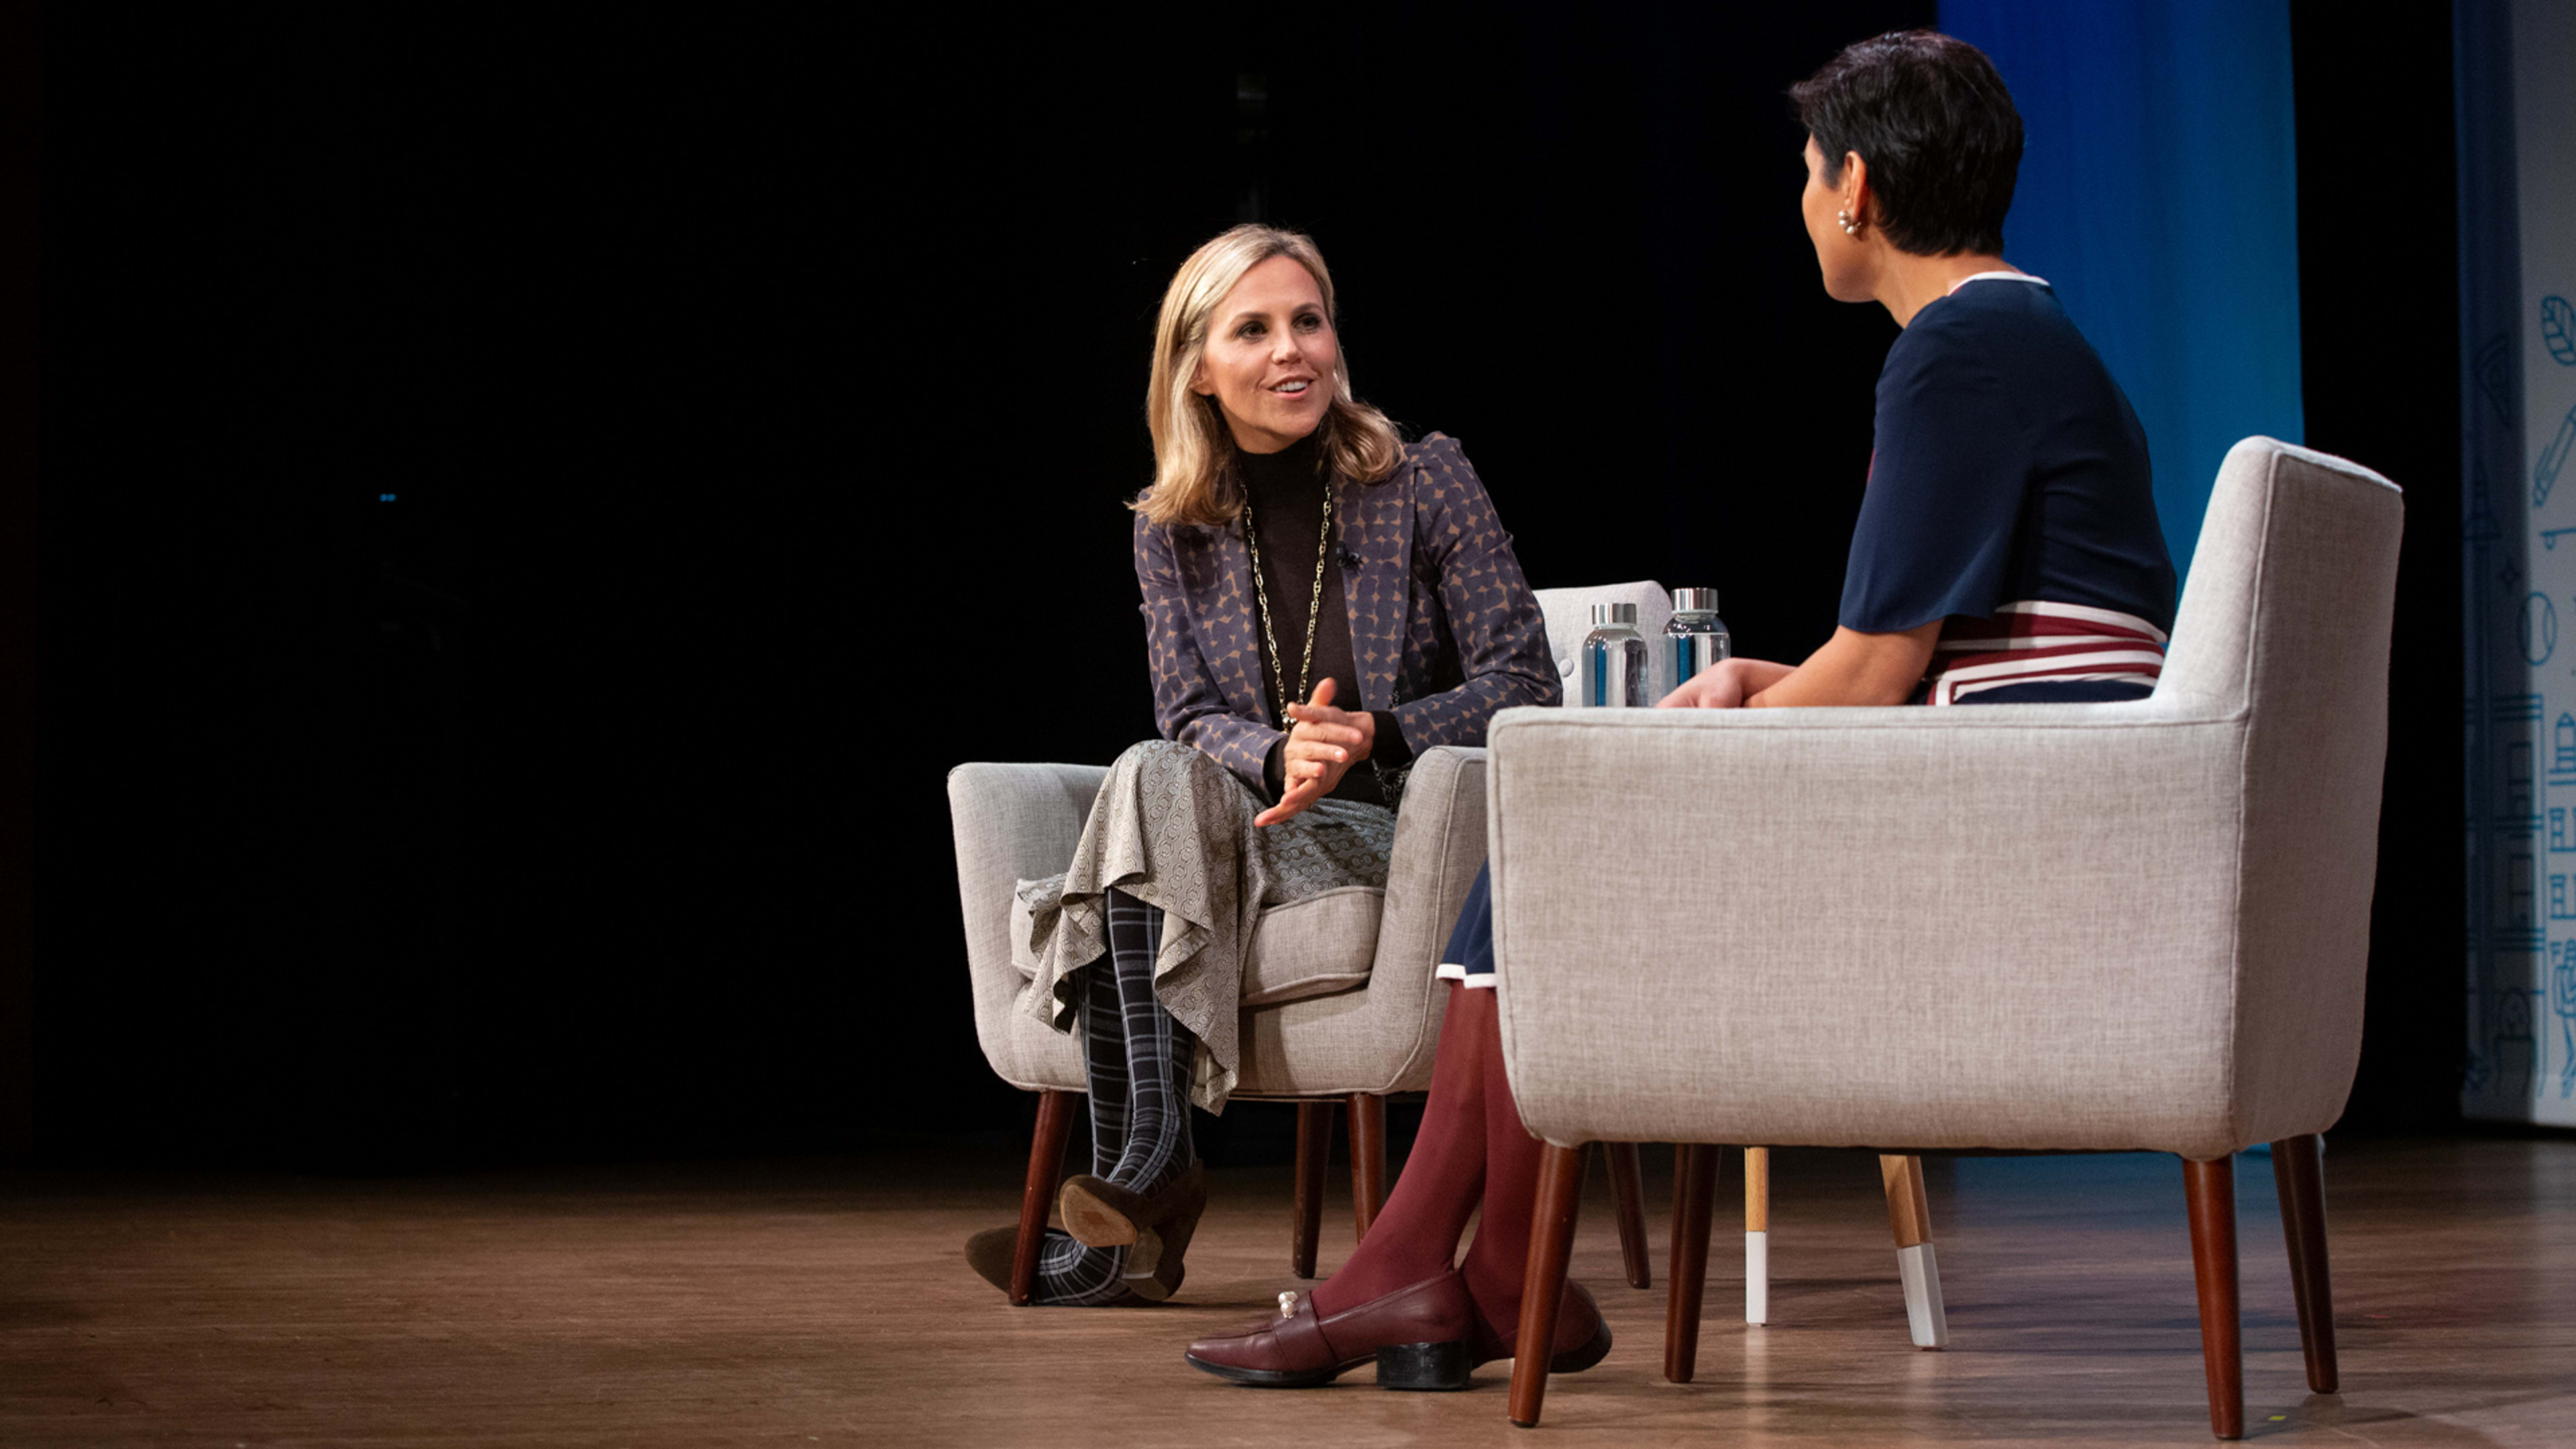 Tory Burch is on a mission to take the stigma out of ambition